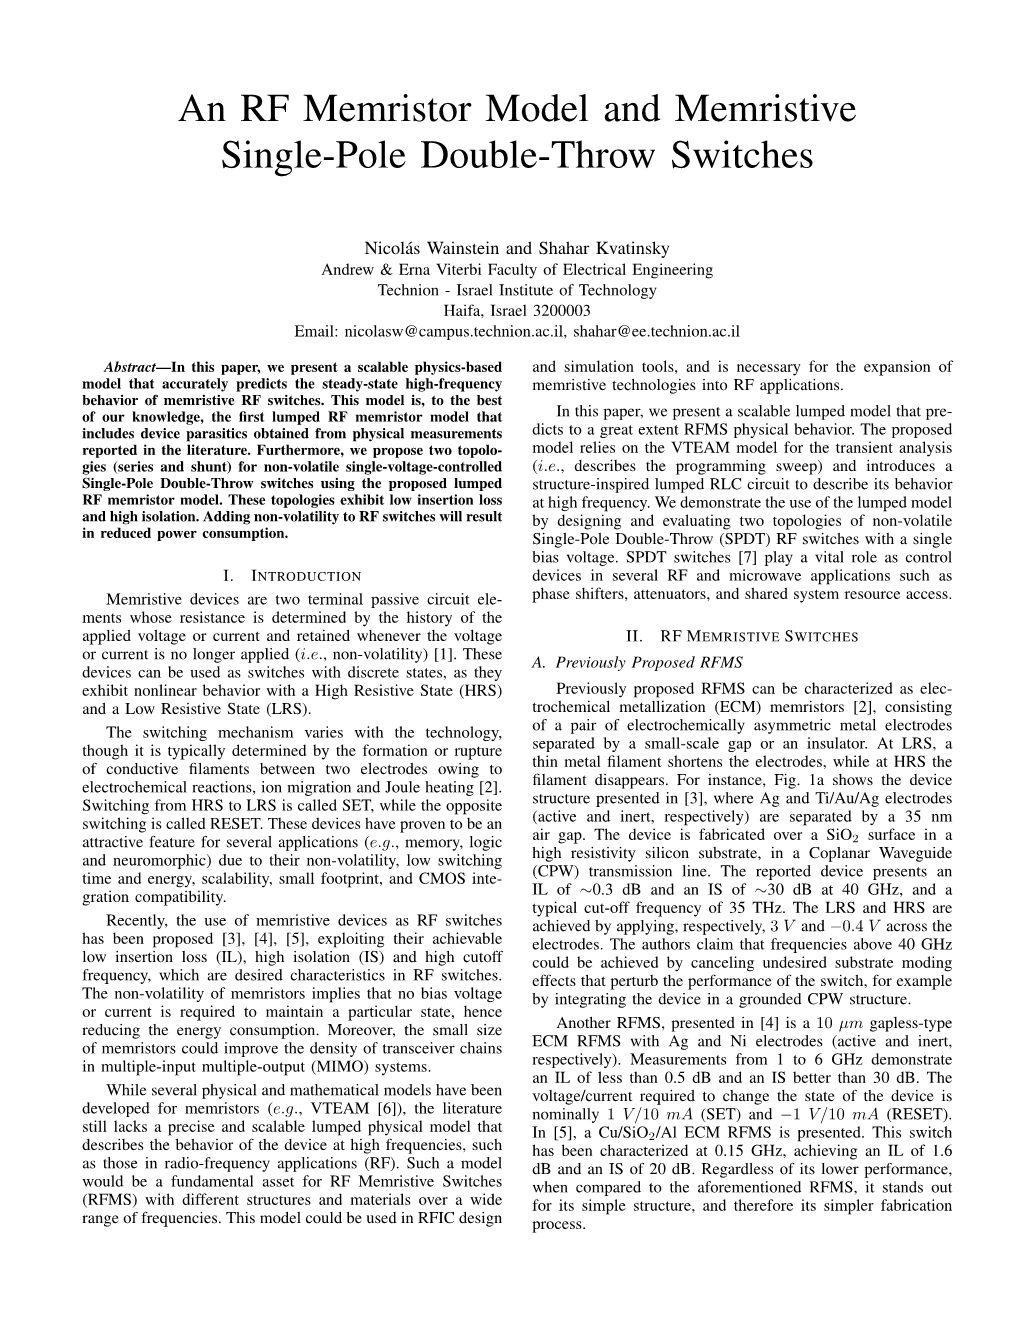 An RF Memristor Model and Memristive Single-Pole Double-Throw Switches